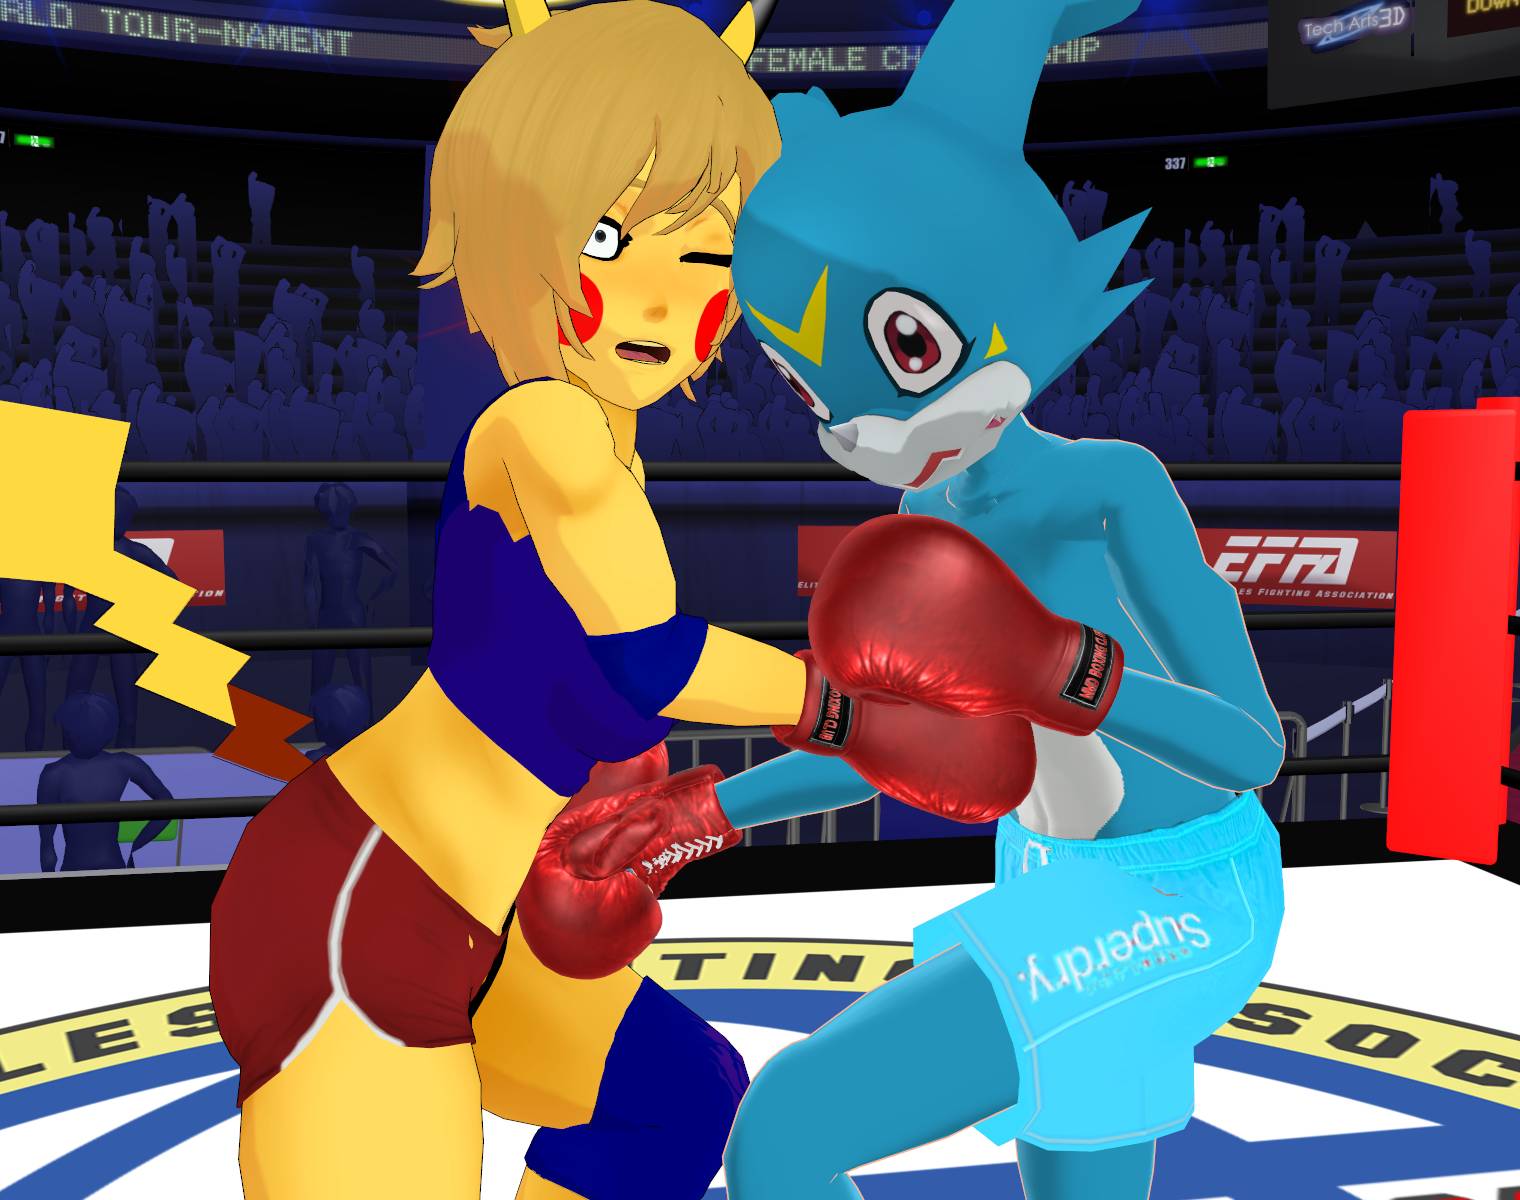 yodelinghaley V @justaminx, Watch the full fight on Patreon, link in